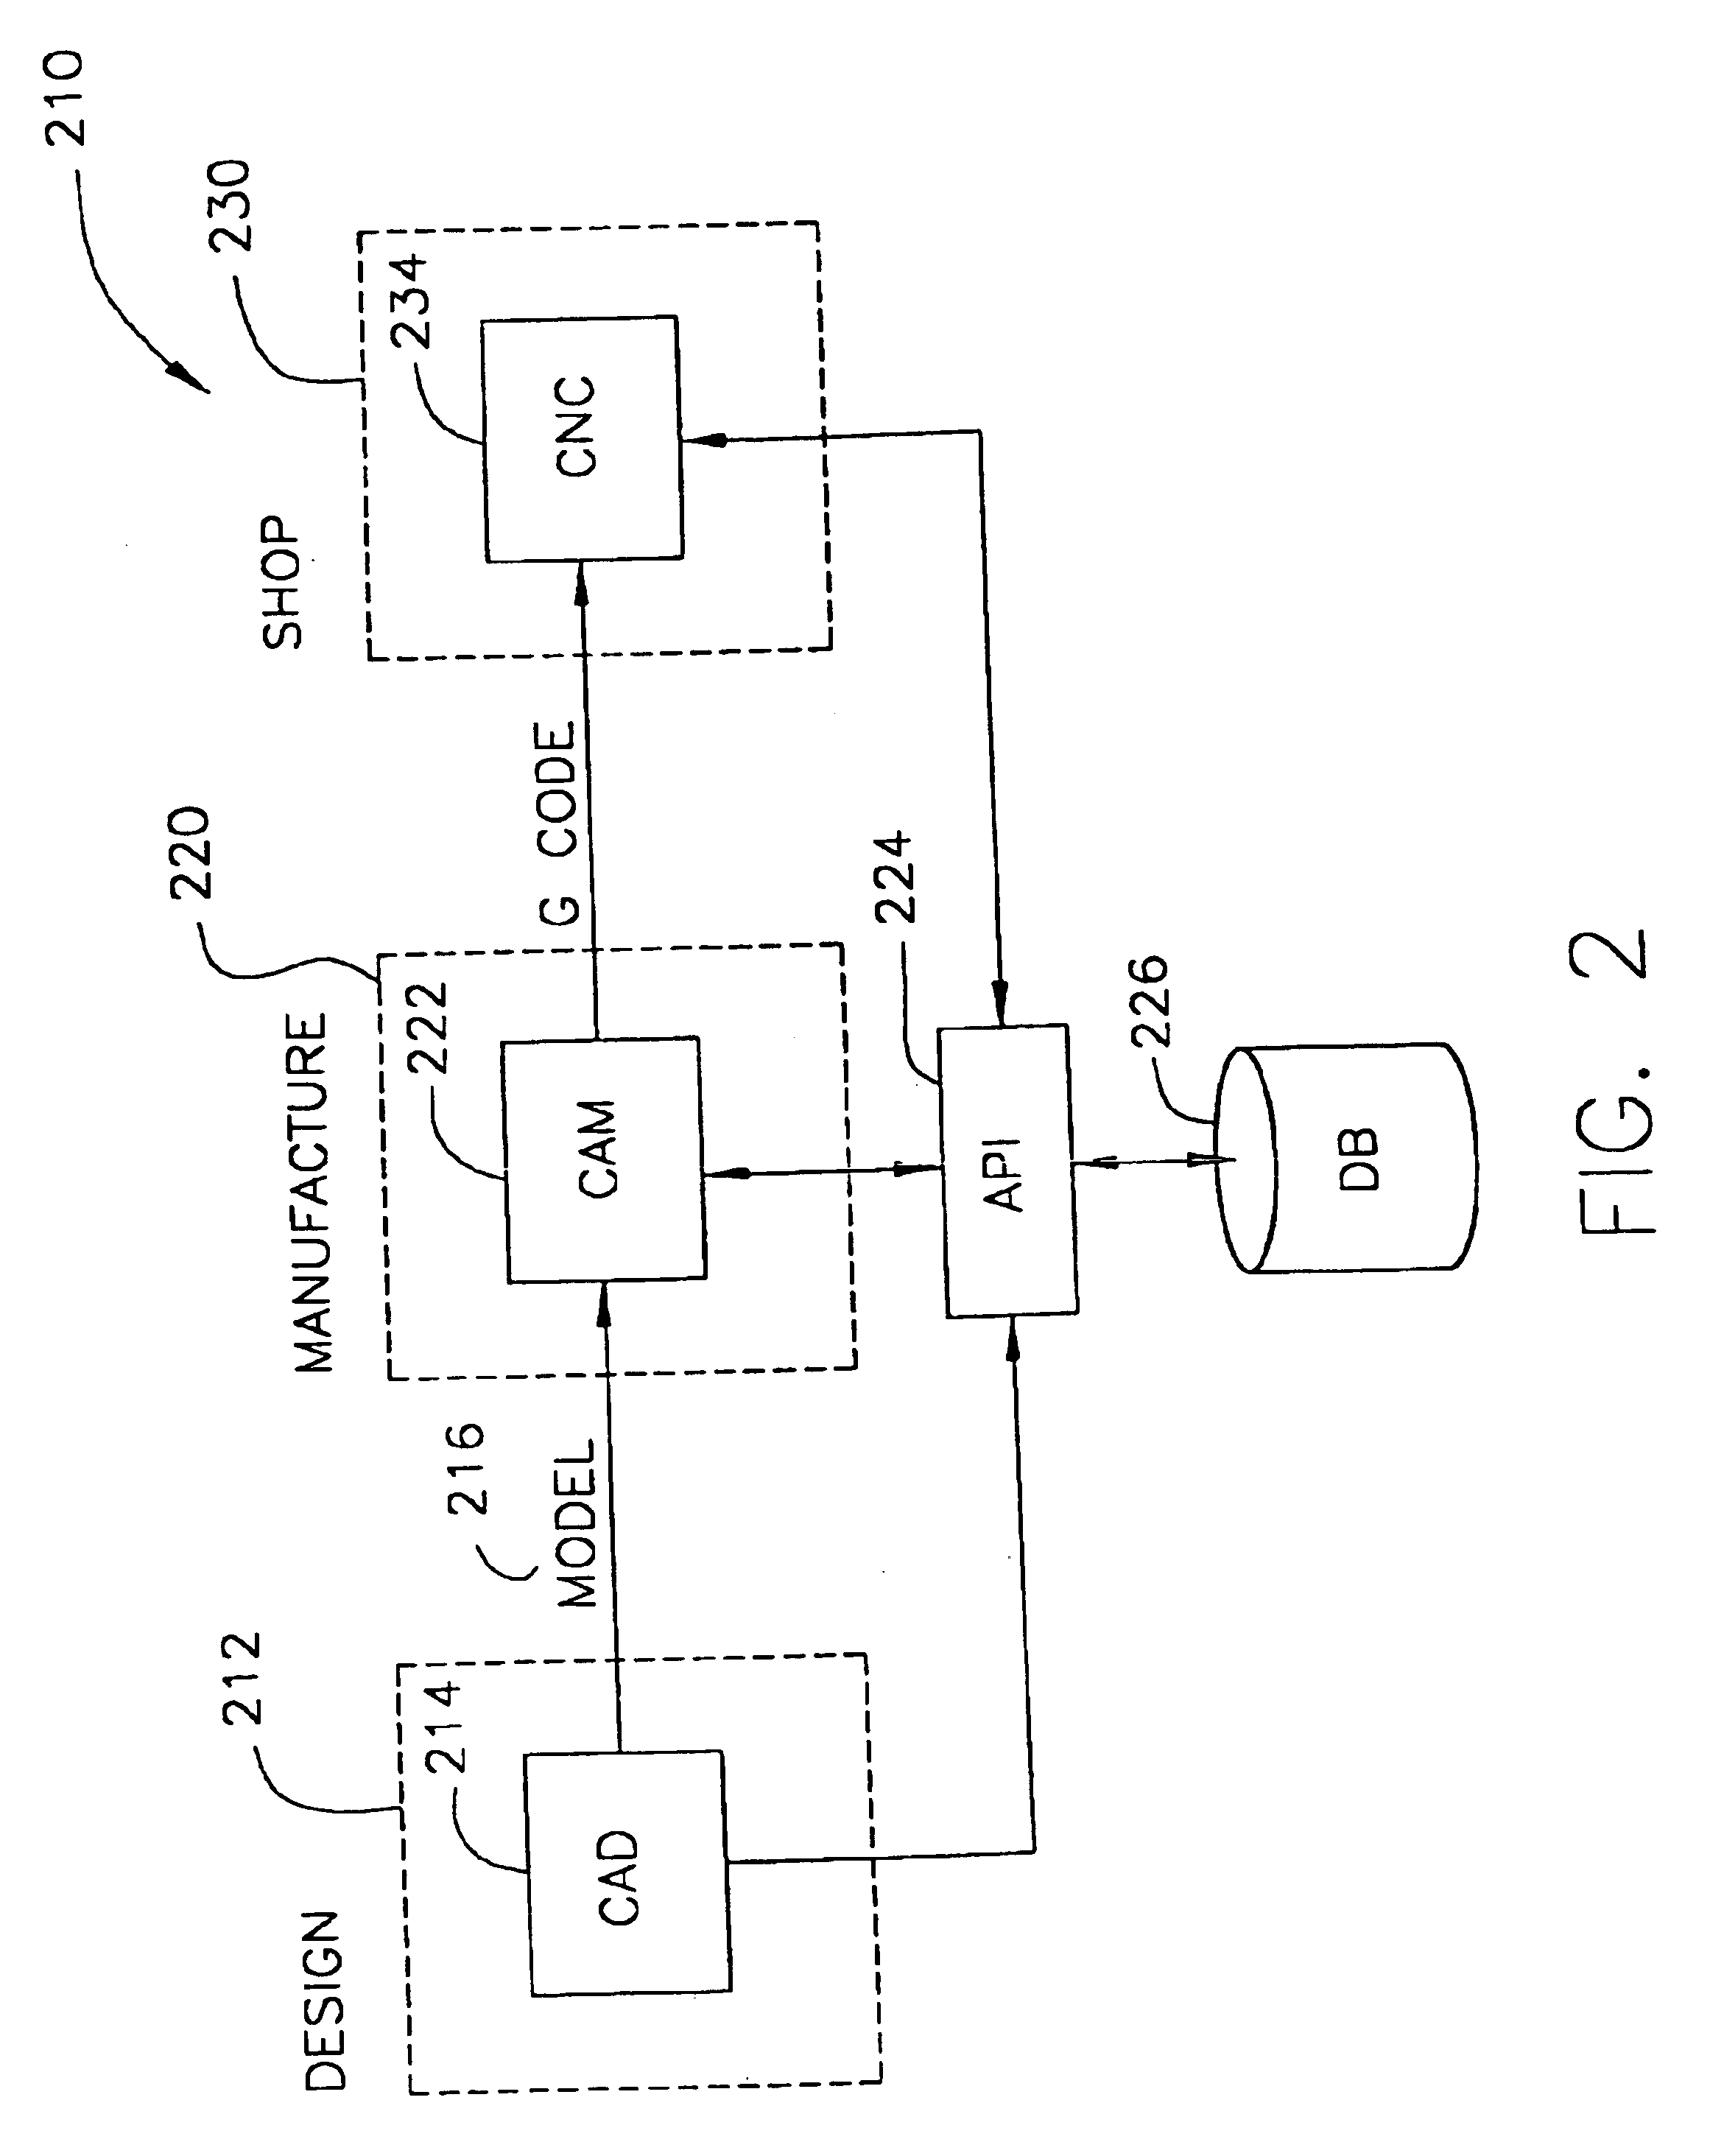 Method and system for computer aided manufacturing